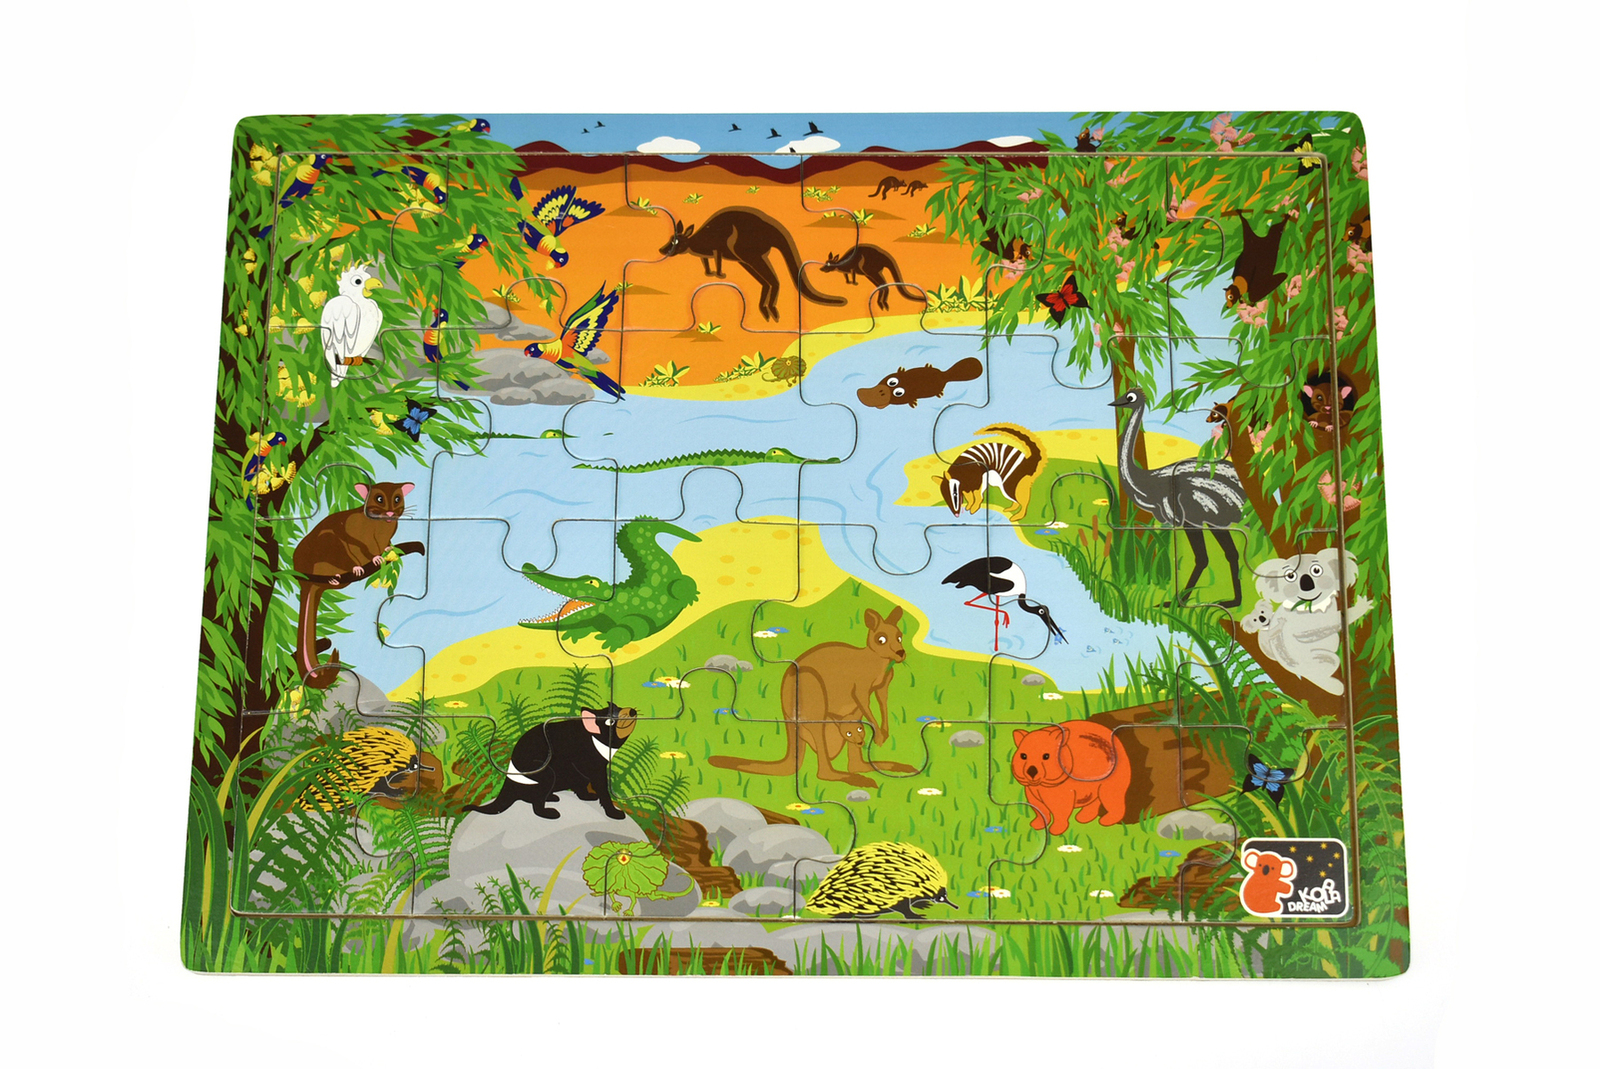 Australian Animals and Names Jigsaw Puzzle (24 Piece)